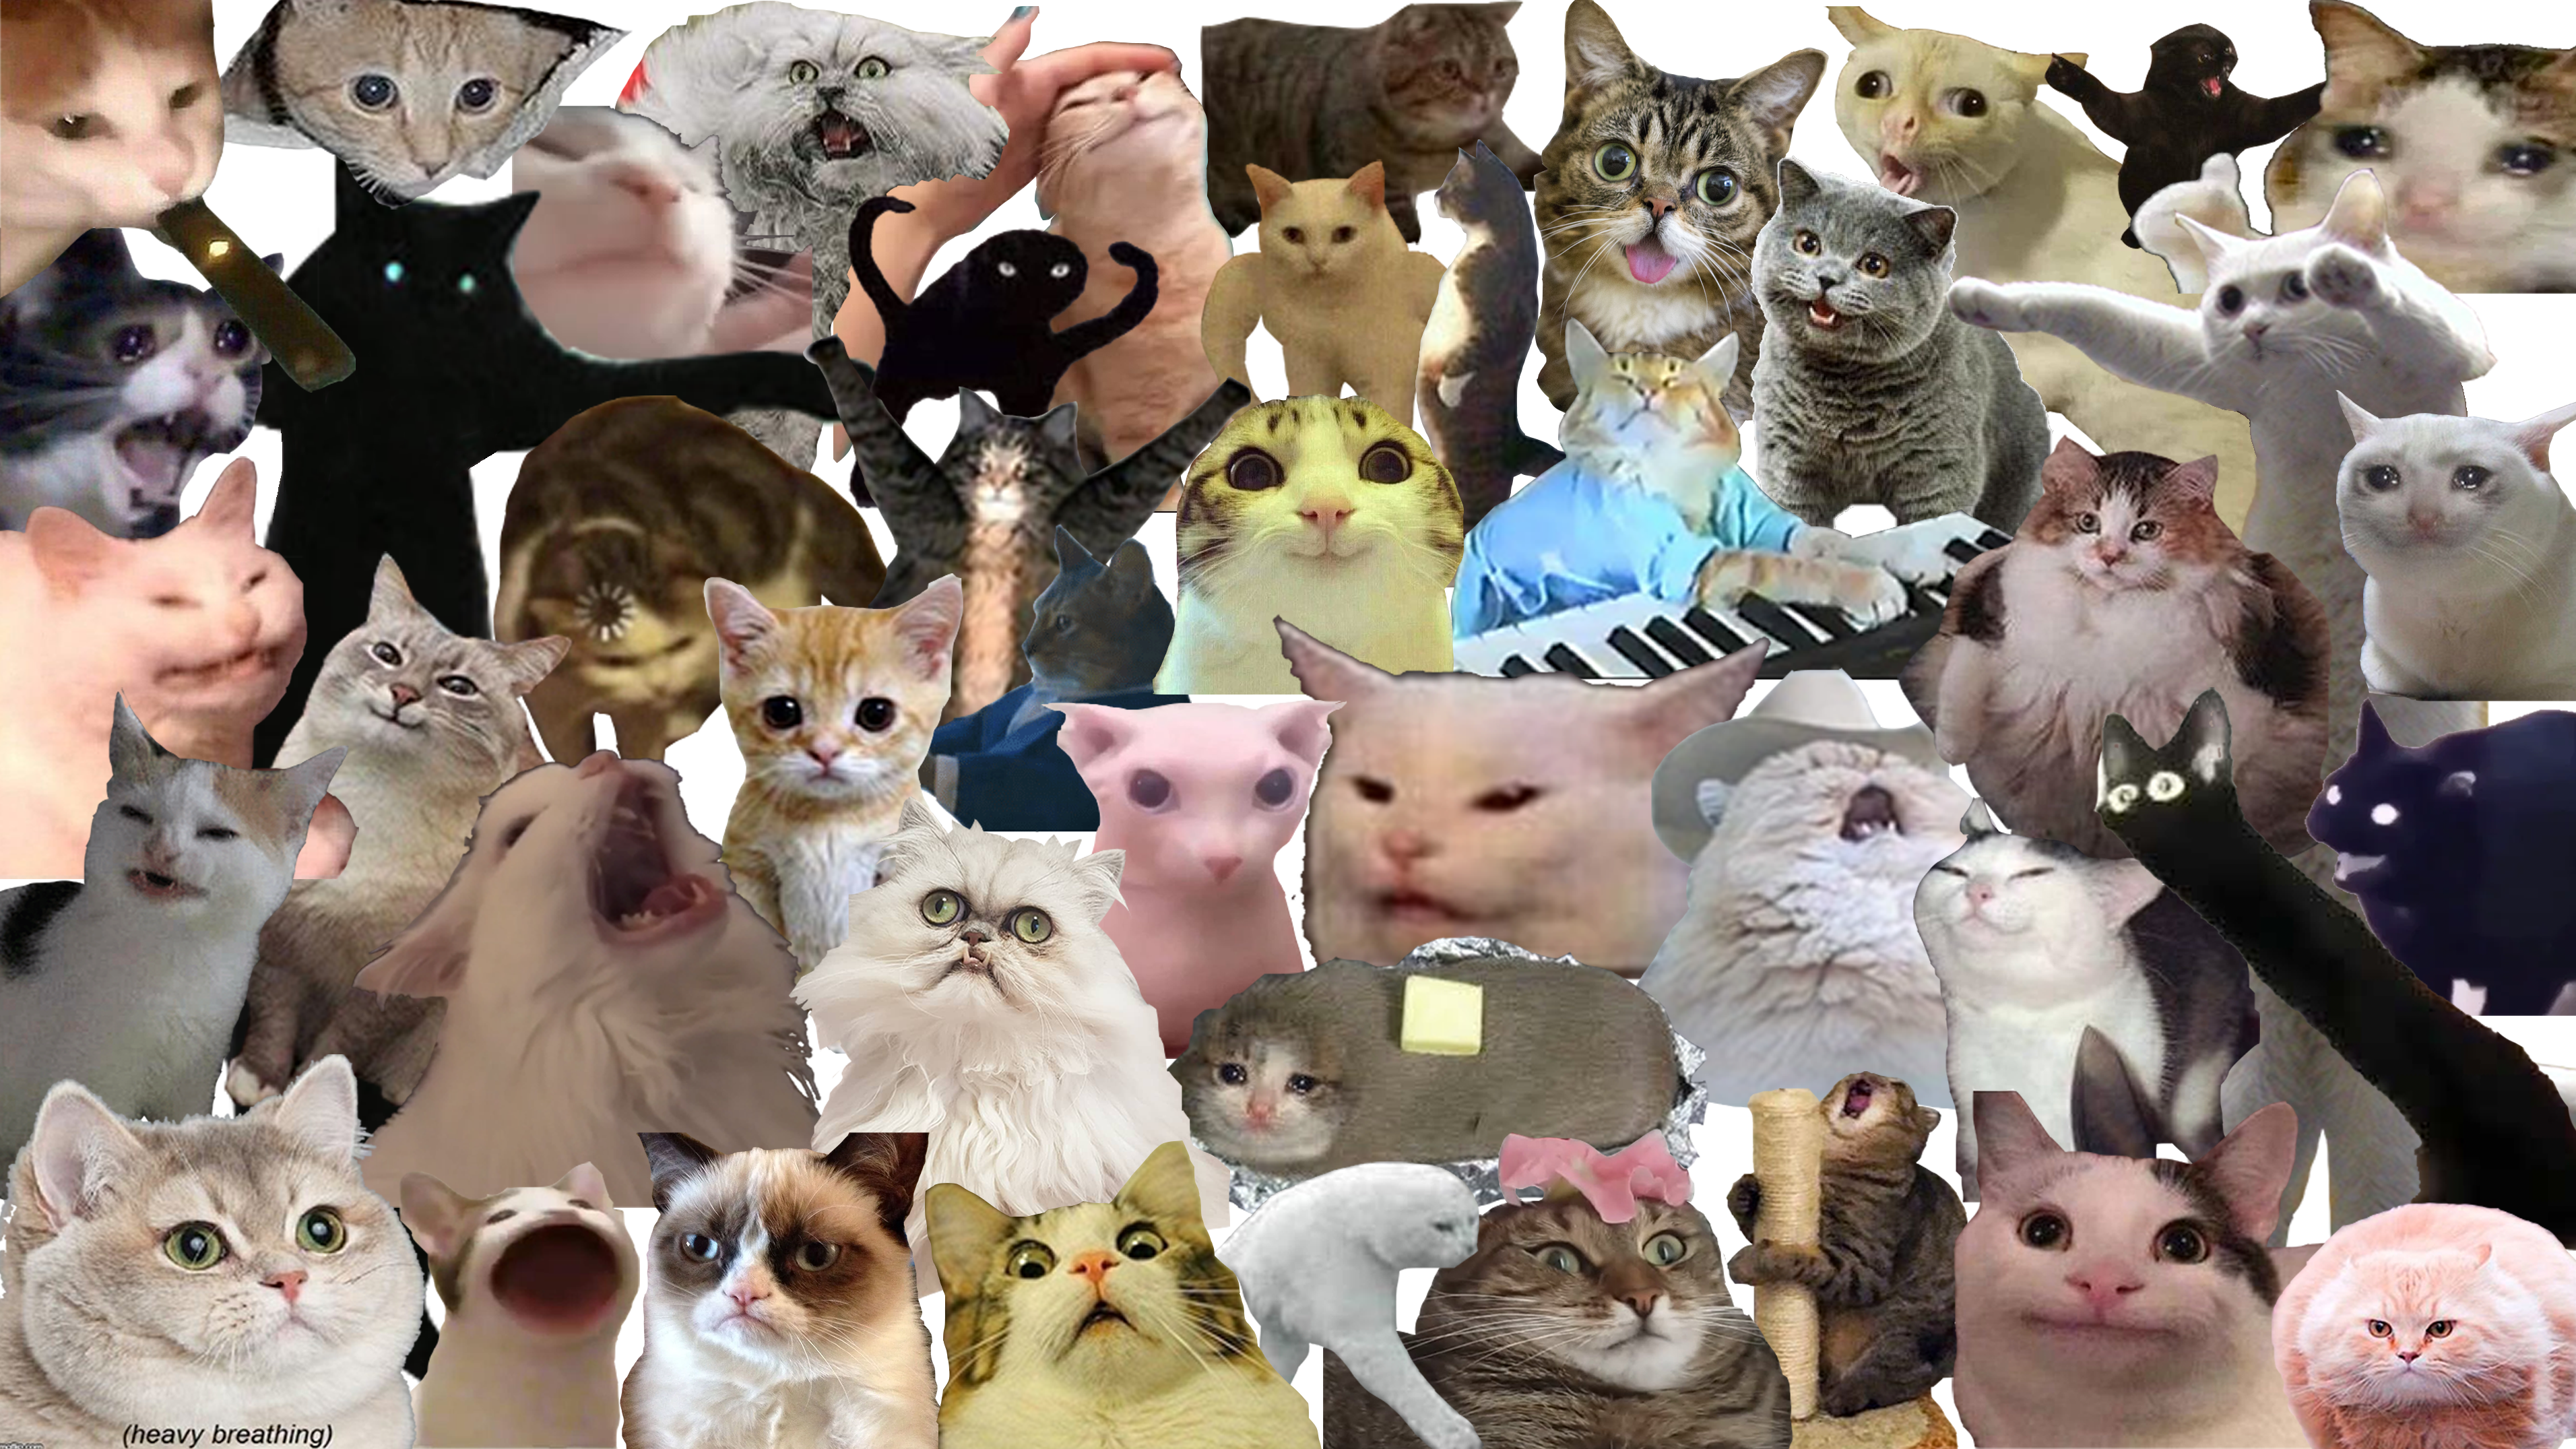 Here is the finished cat meme collage! I hope you enjoy! Thank you for all the submissions in my first post